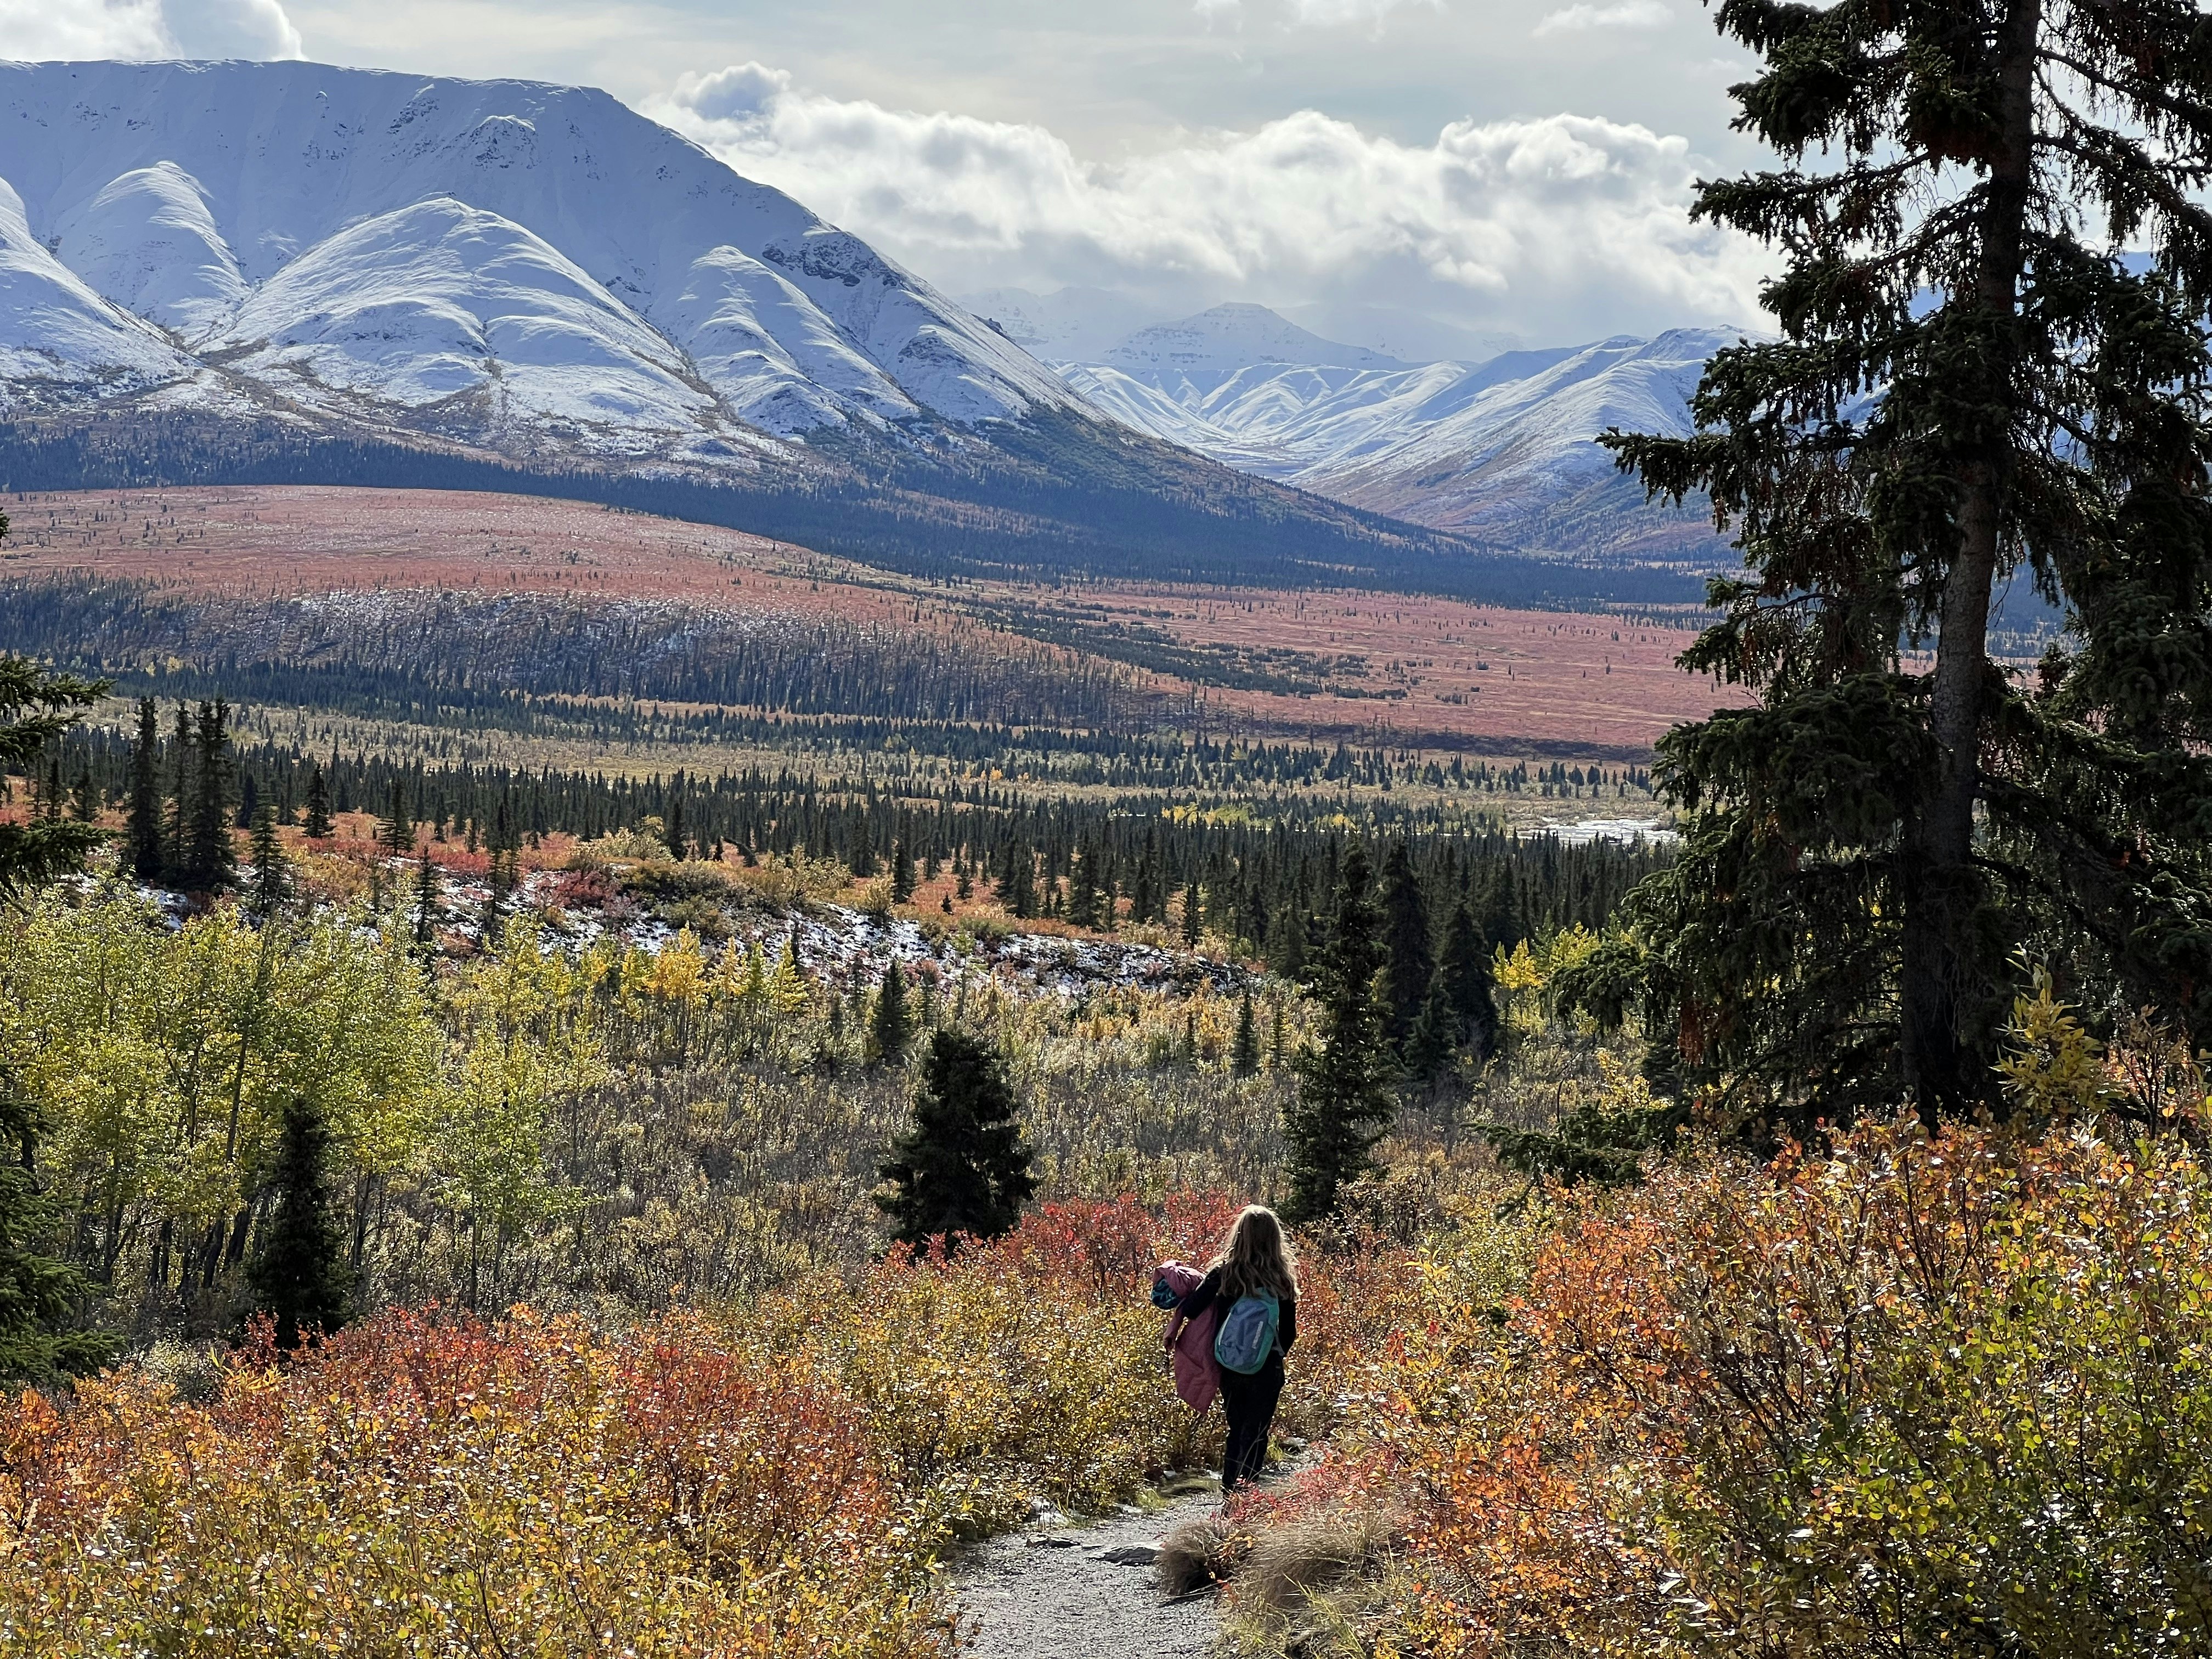 Sarah hikes along the Salvage Alpine Trail in Denali past some trees with the snow-capped mountains in the background